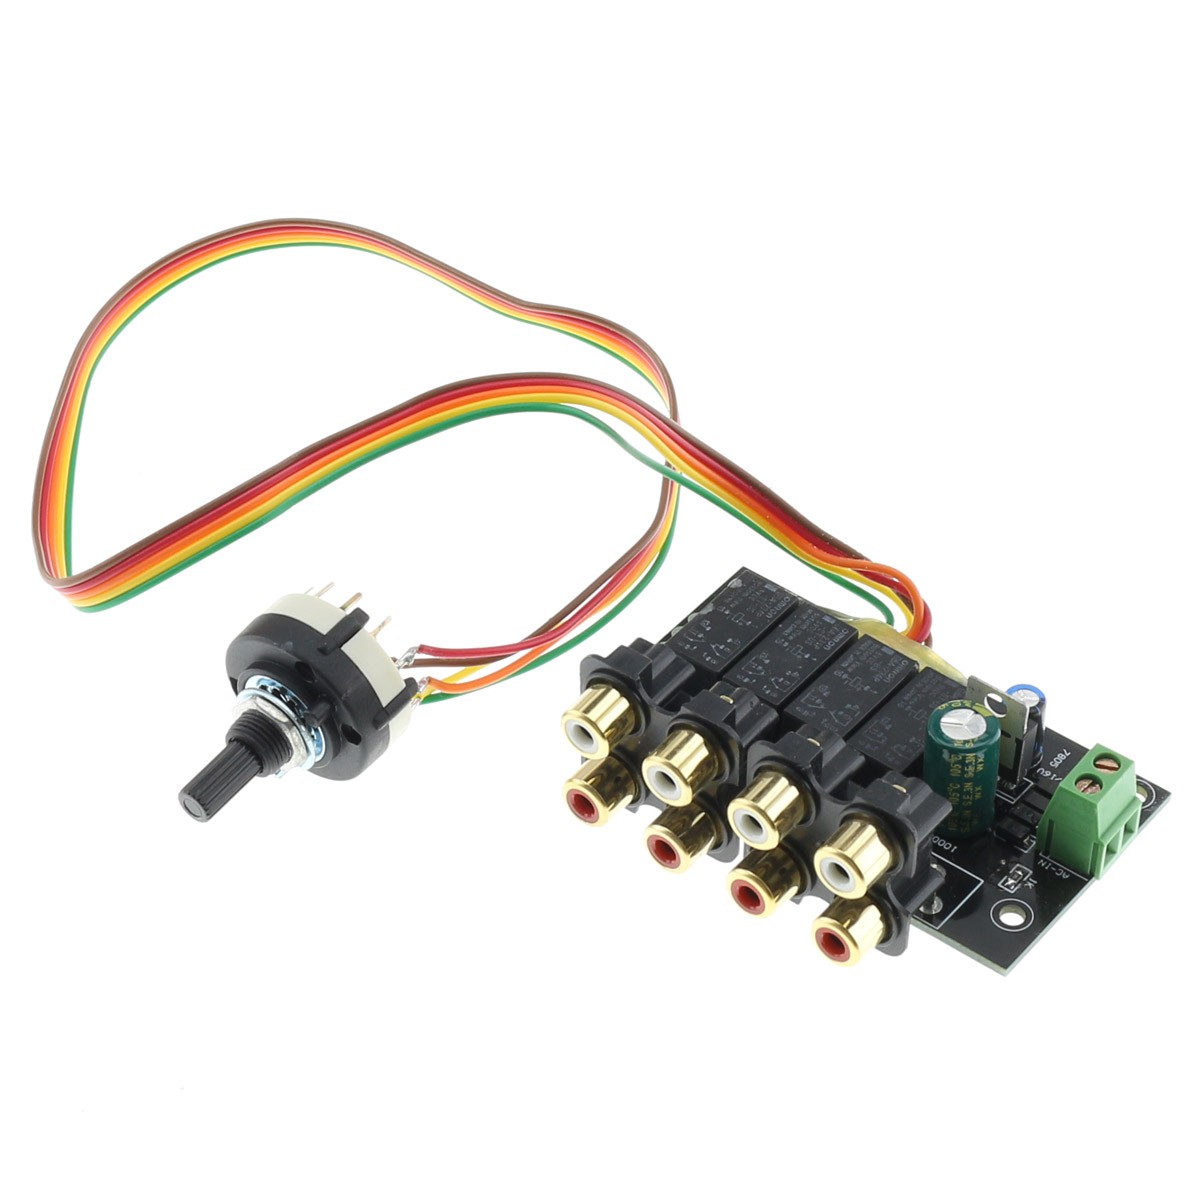 4 channel stereo source selector module